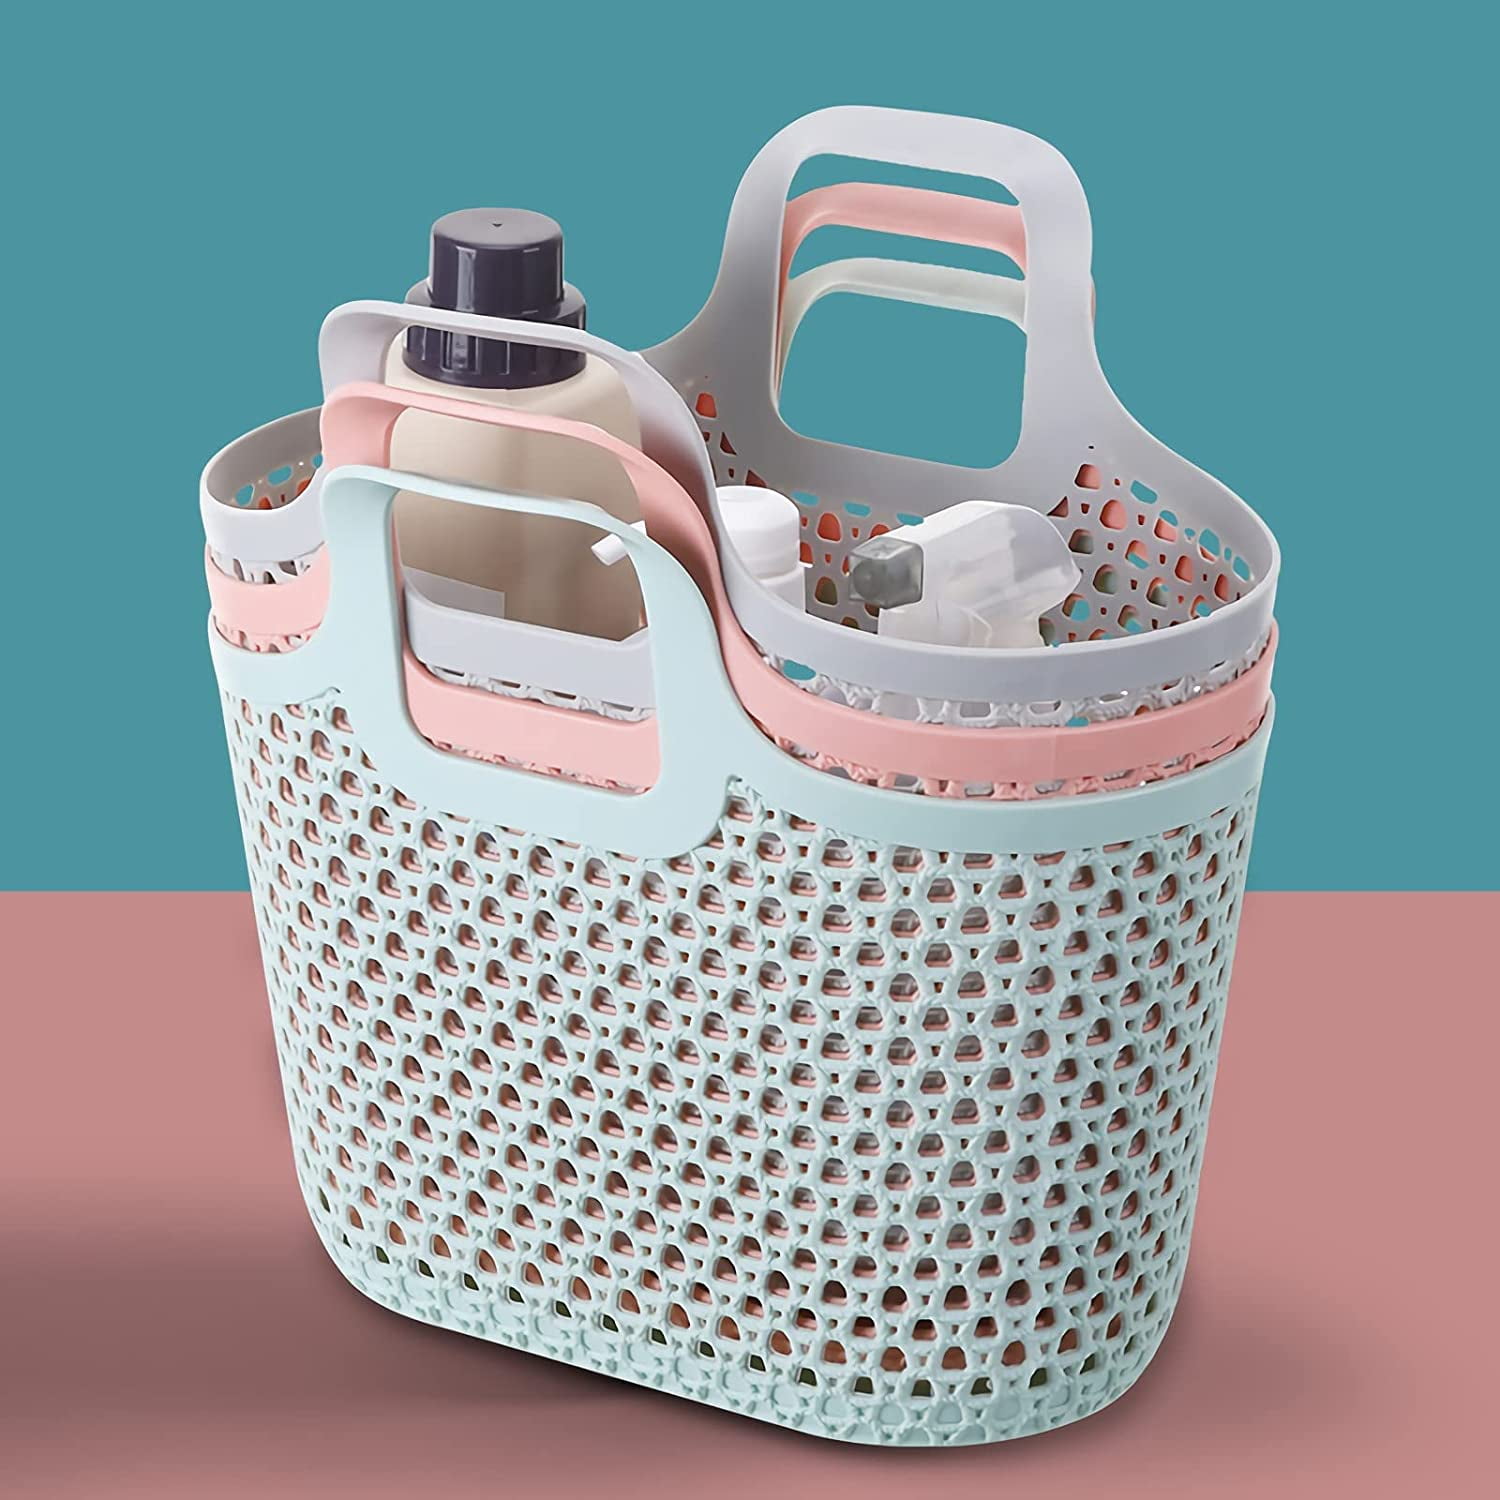 TONKBEEY Portable Storage Basket Cleaning Caddy Storage Organizer Tote with  Handle for Laundry Bathroom Storage Baskets